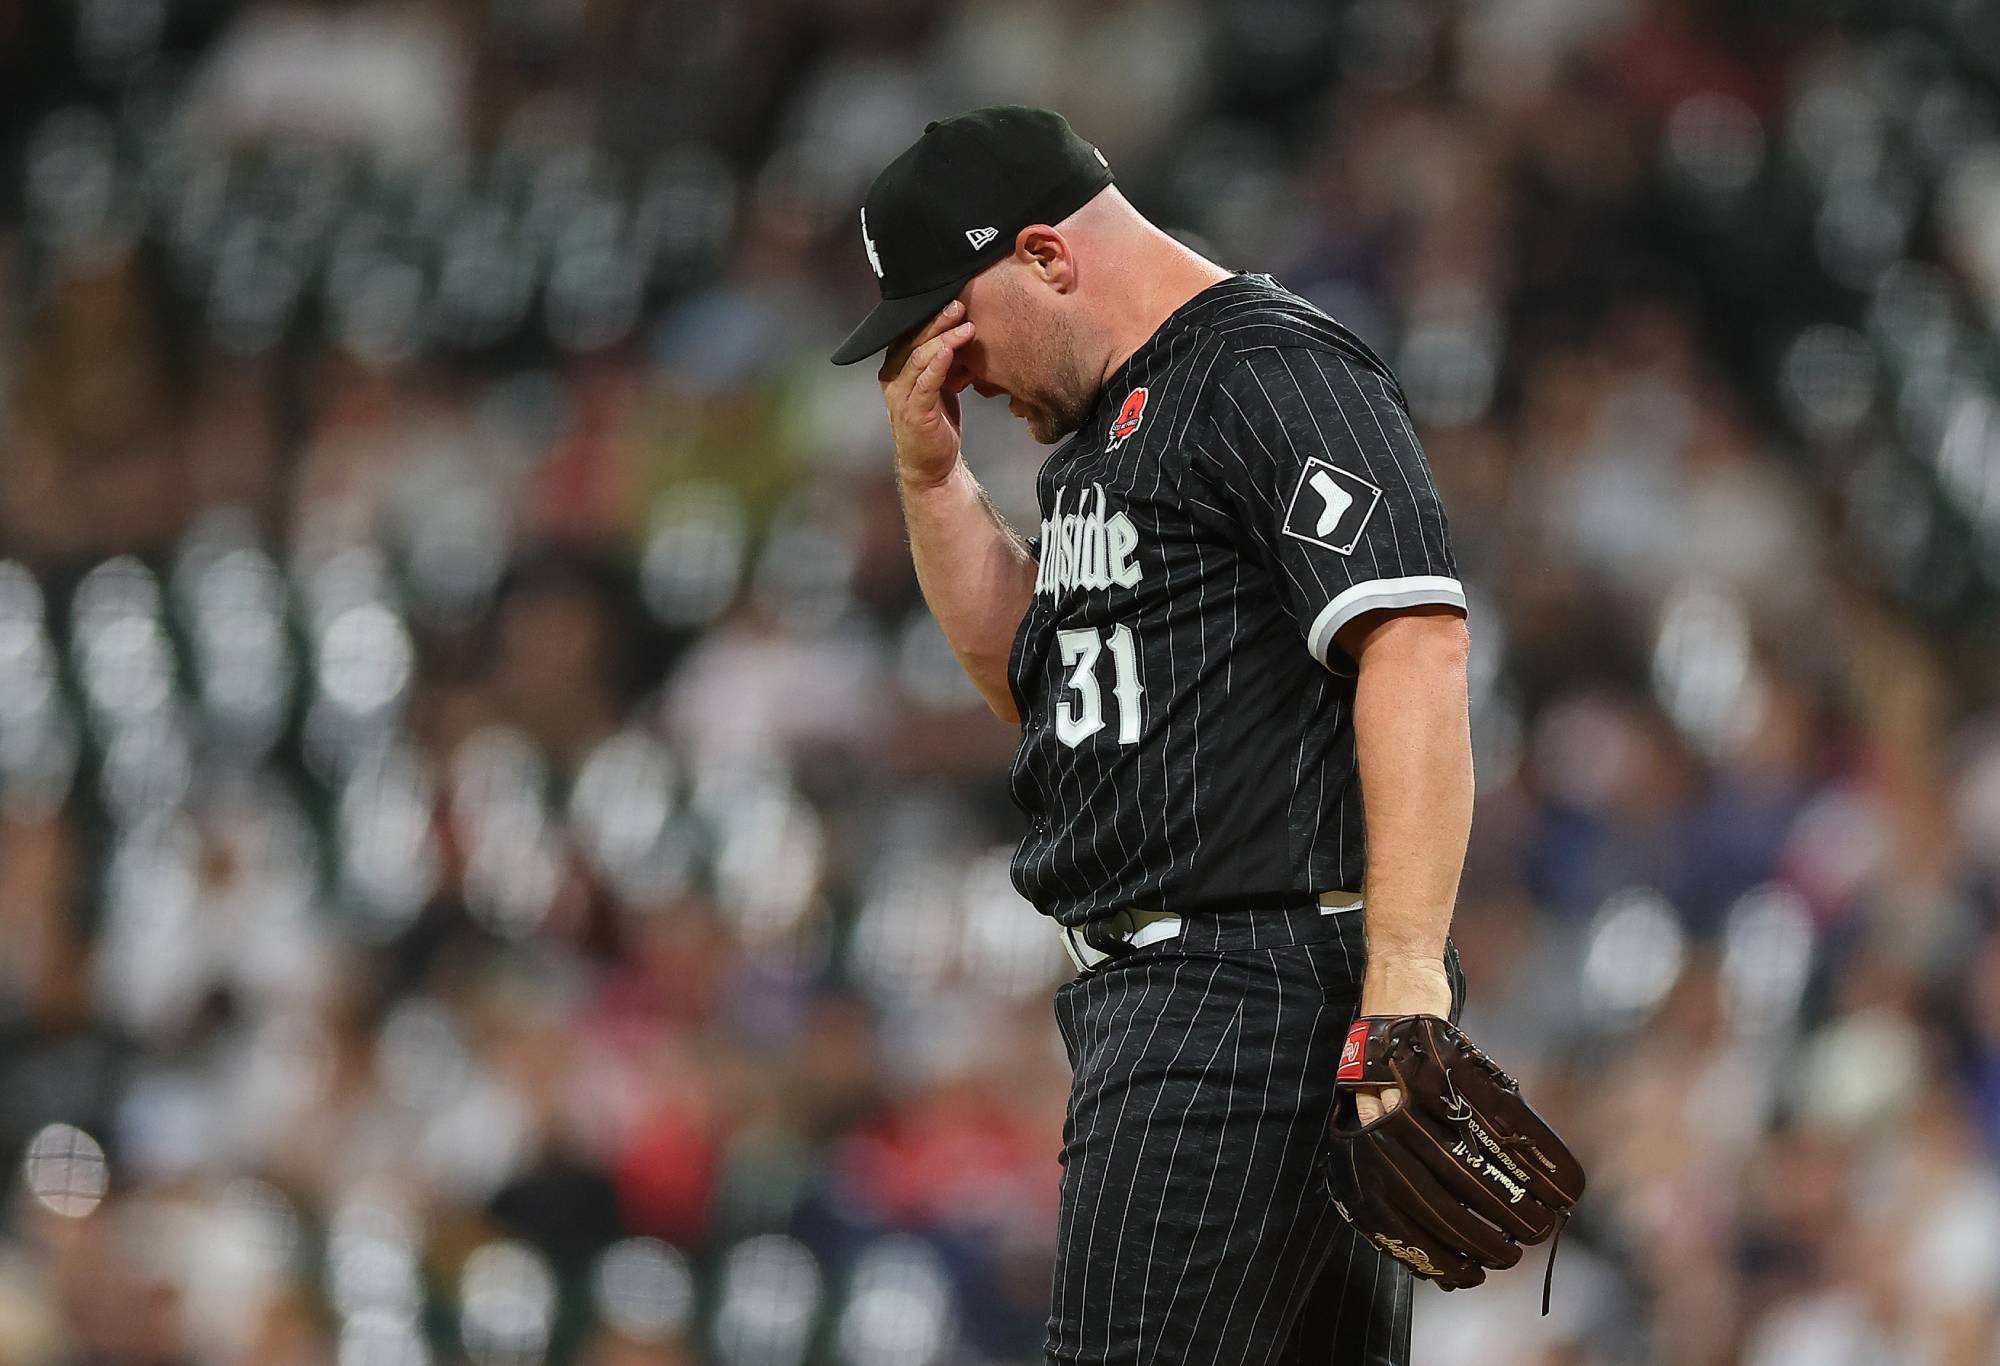 Chicago White Sox relief pitcher Liam Hendriks (31) makes a play at first base during a Major League Baseball game between the Los Angeles Angels and the Chicago White Sox on May 29, 2023 at Guaranteed Rate Field in Chicago, IL. (Photo by Melissa Tamez/Icon Sportswire via Getty Images)